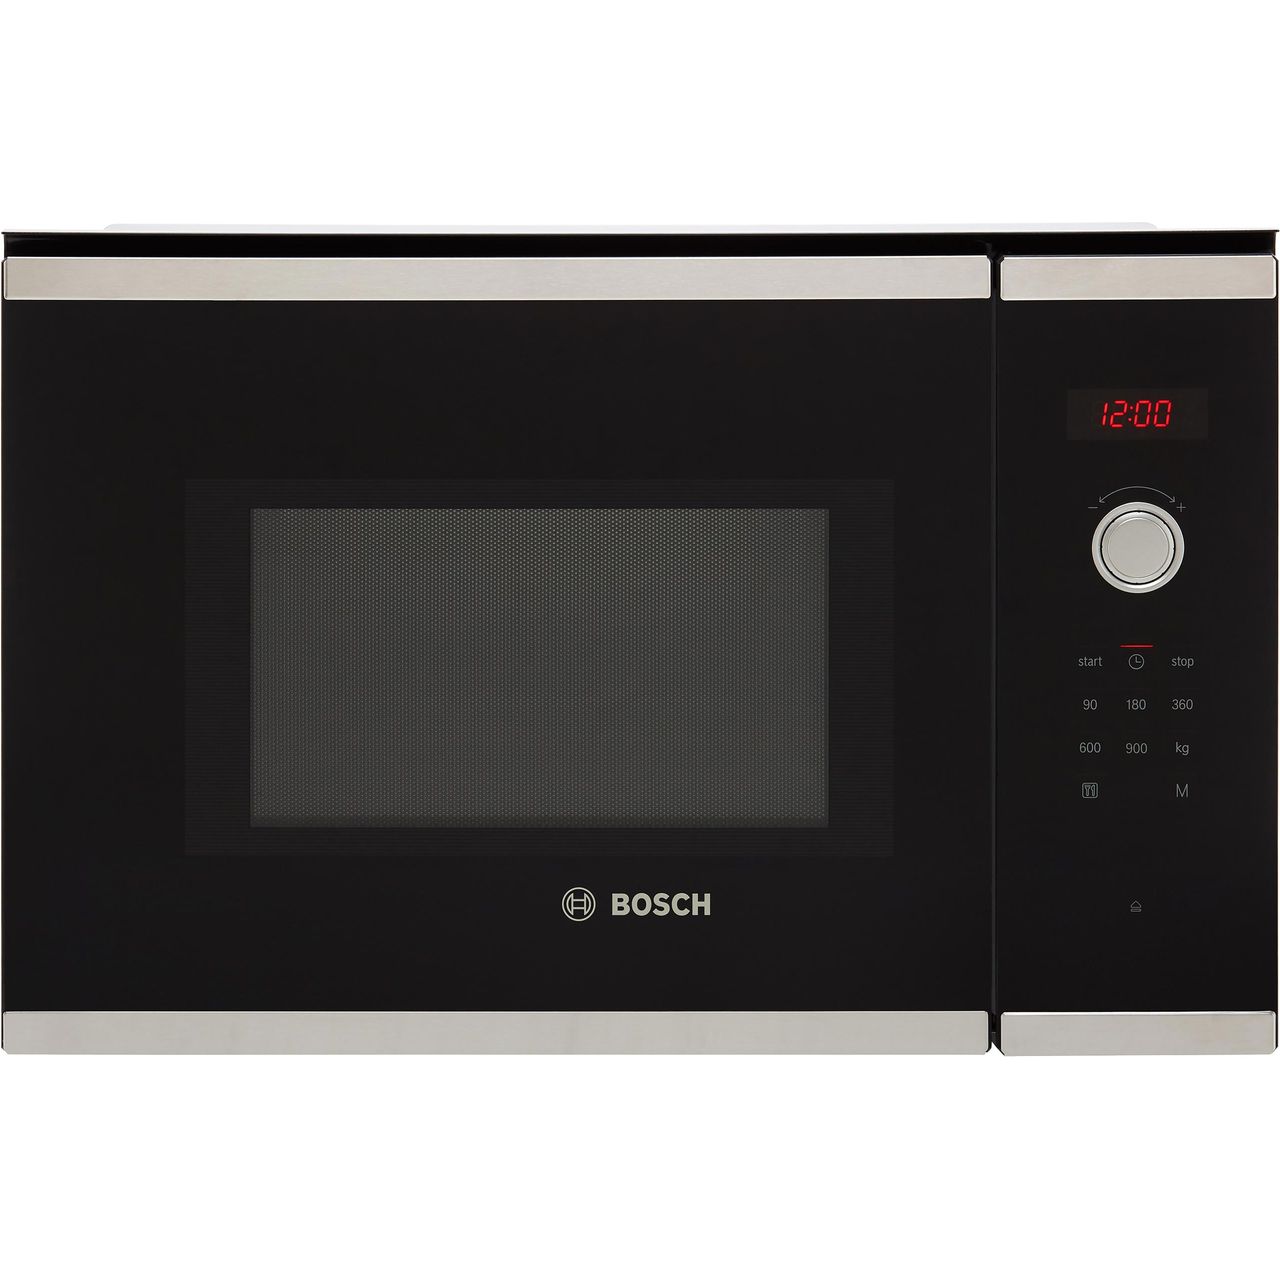 Bosch Serie 4 BFL553MS0B Built In Microwave Review